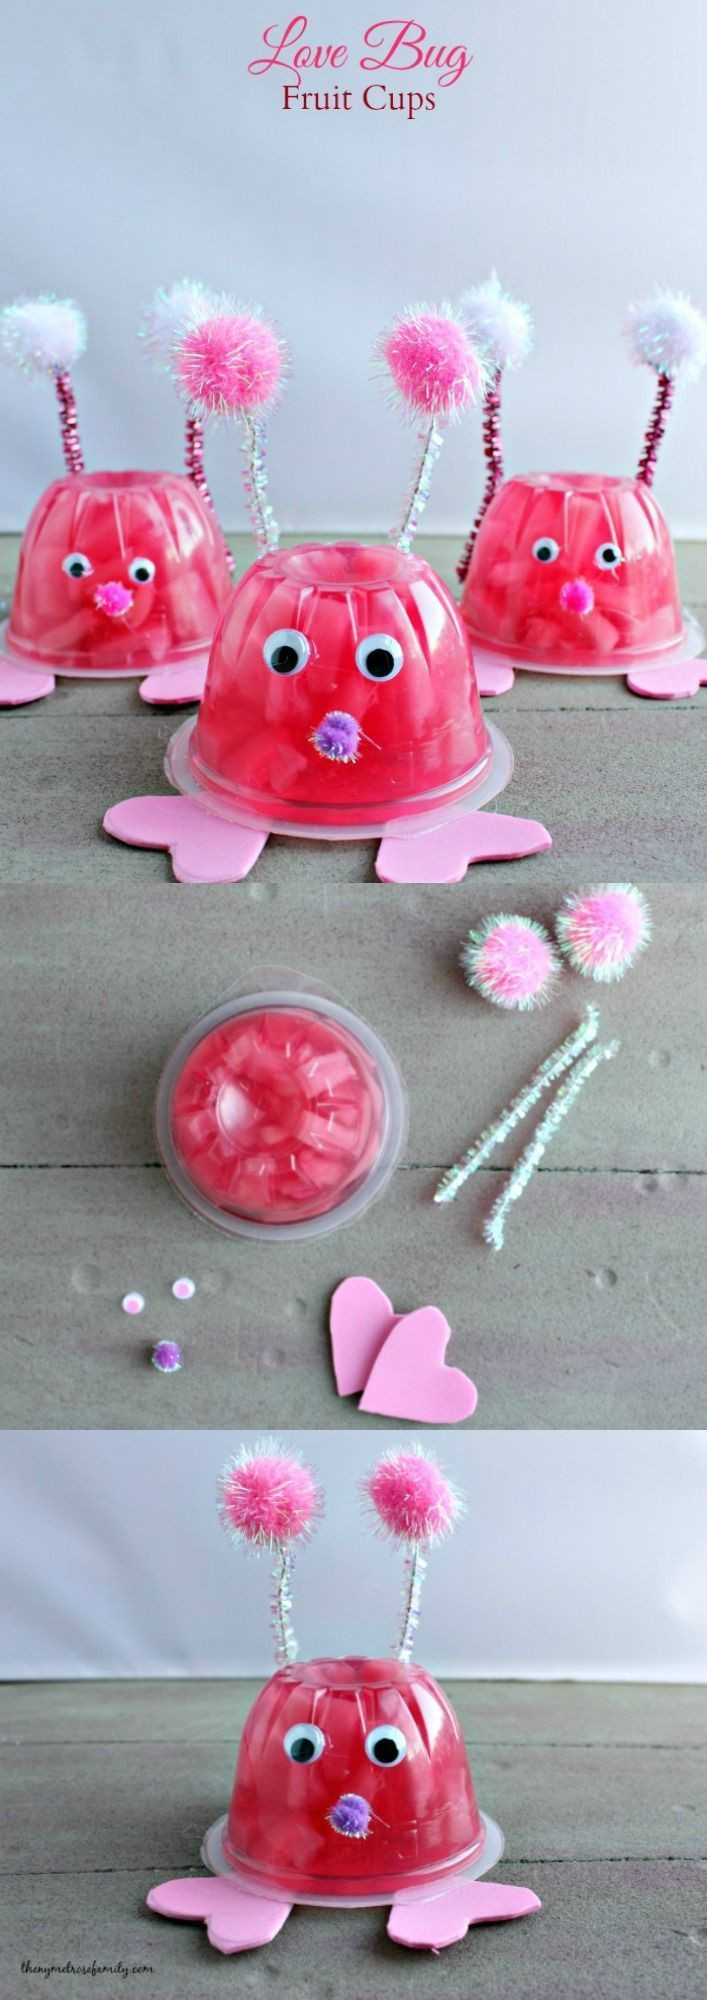 Toddler Valentines Day Gift Ideas
 Valentines Day Ideas for Kids Love Bug Fruit Cups